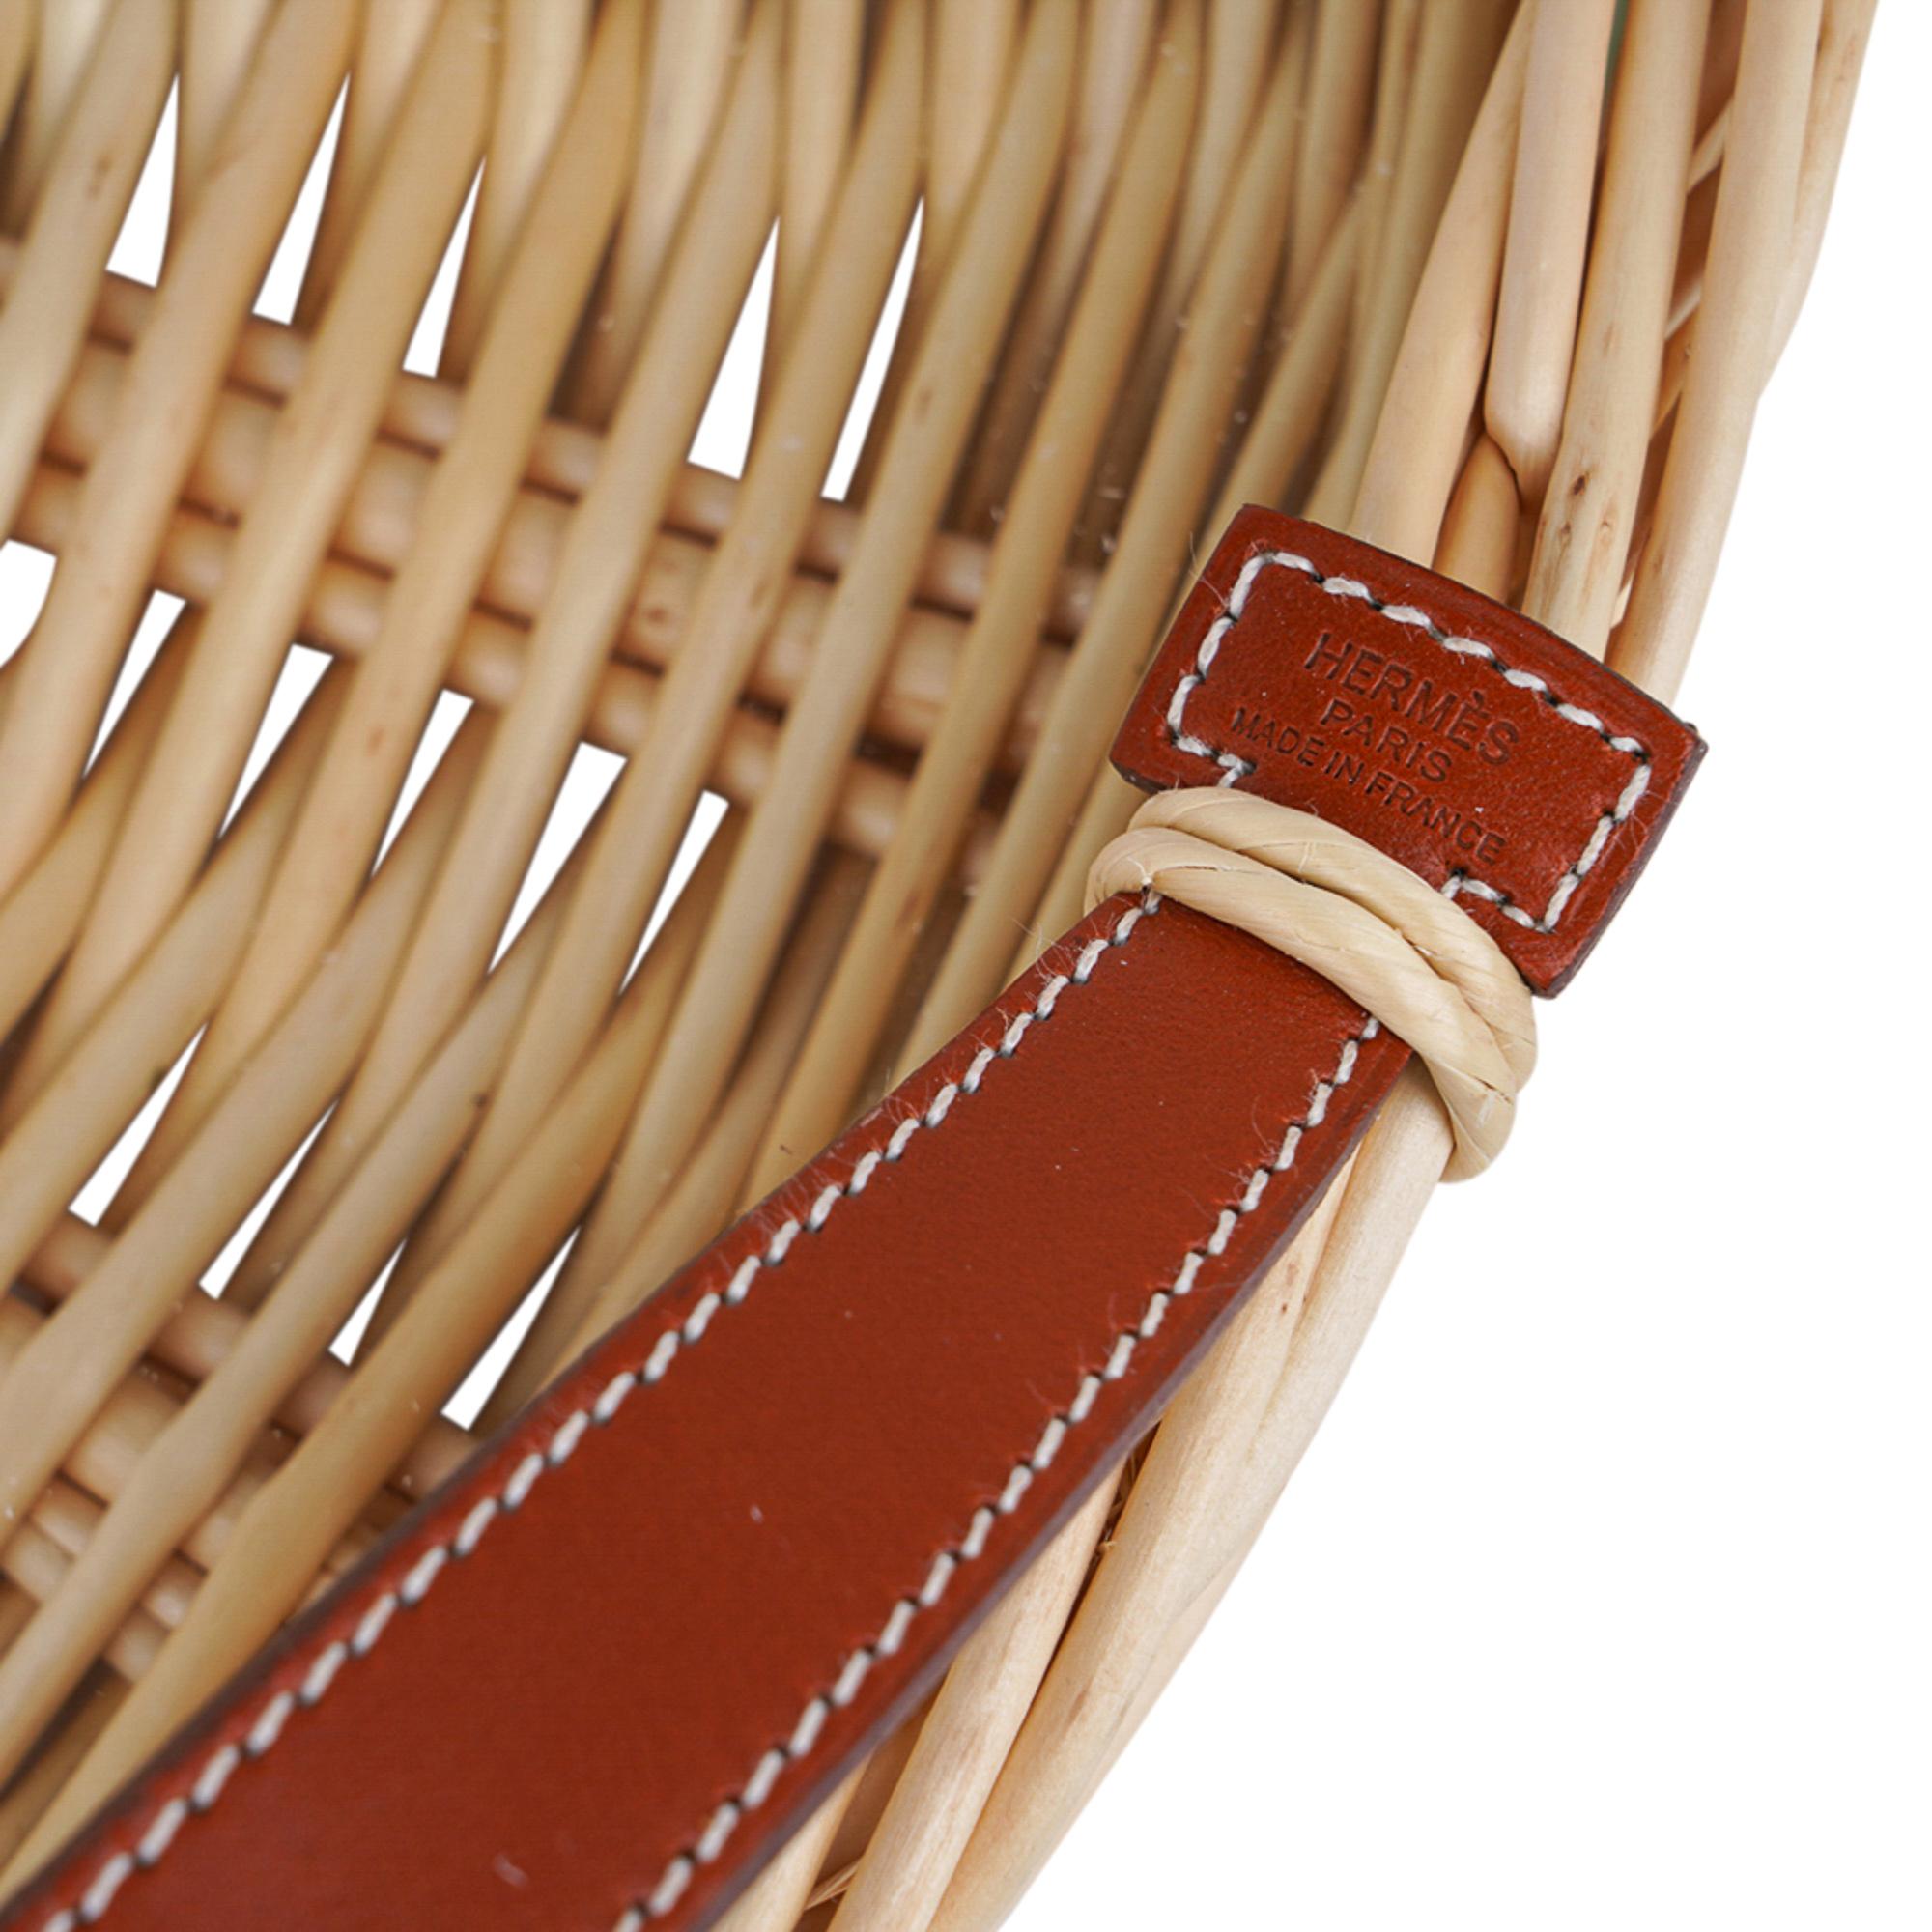 Mightychic offers an Hermes Osier (Osaeraie) Round hand woven serving tray.
Featured with Brique coloured Bridle leather handles.
Fitted glass interior to protect the wicker.
Leather has signature Hermes stamp.
Timeless piece also makes for a